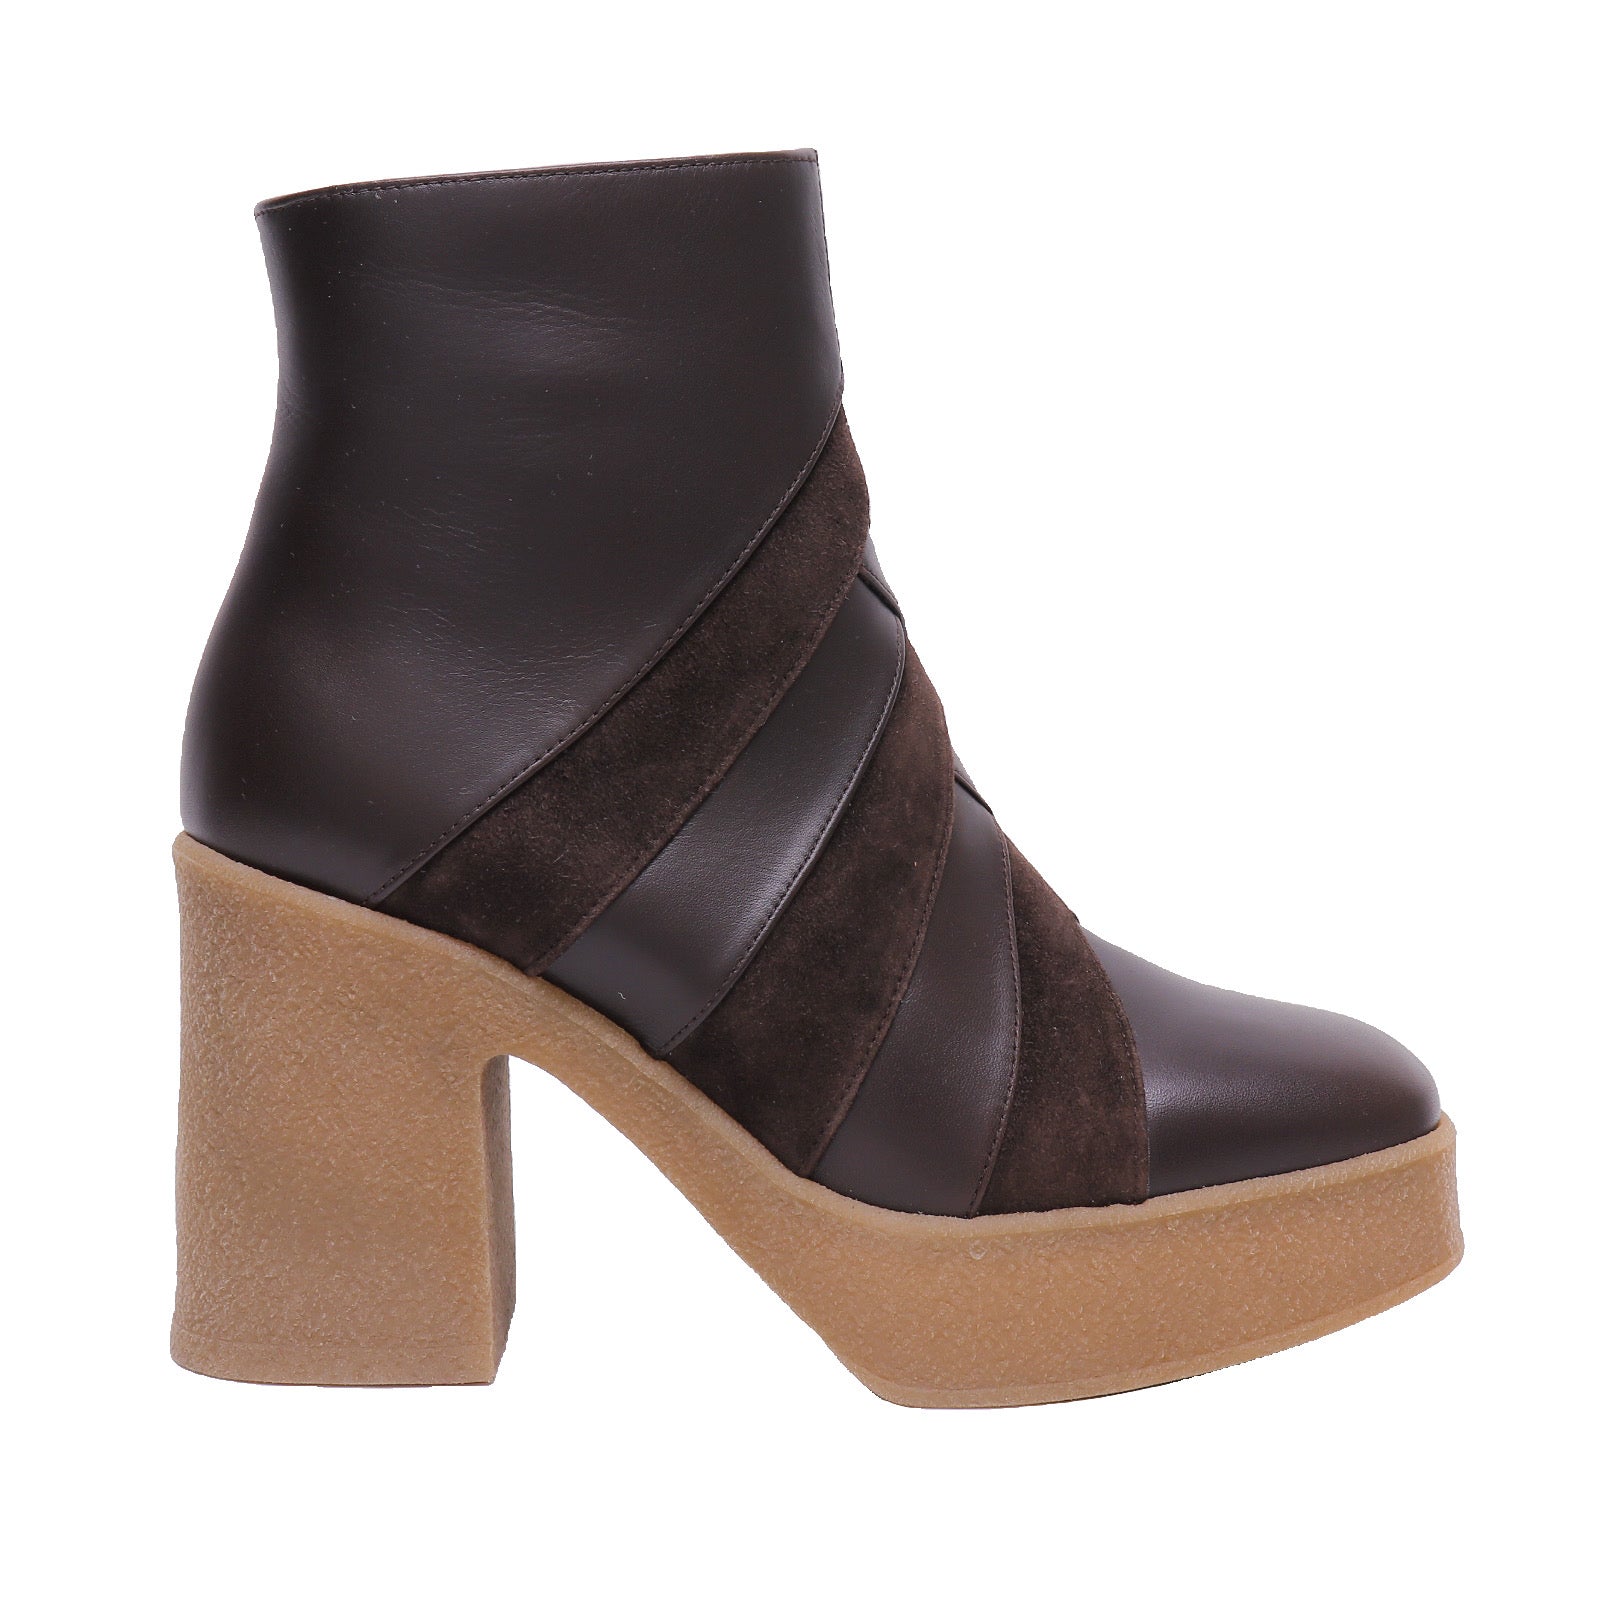 Chie Mihara Lagalet ankle boot